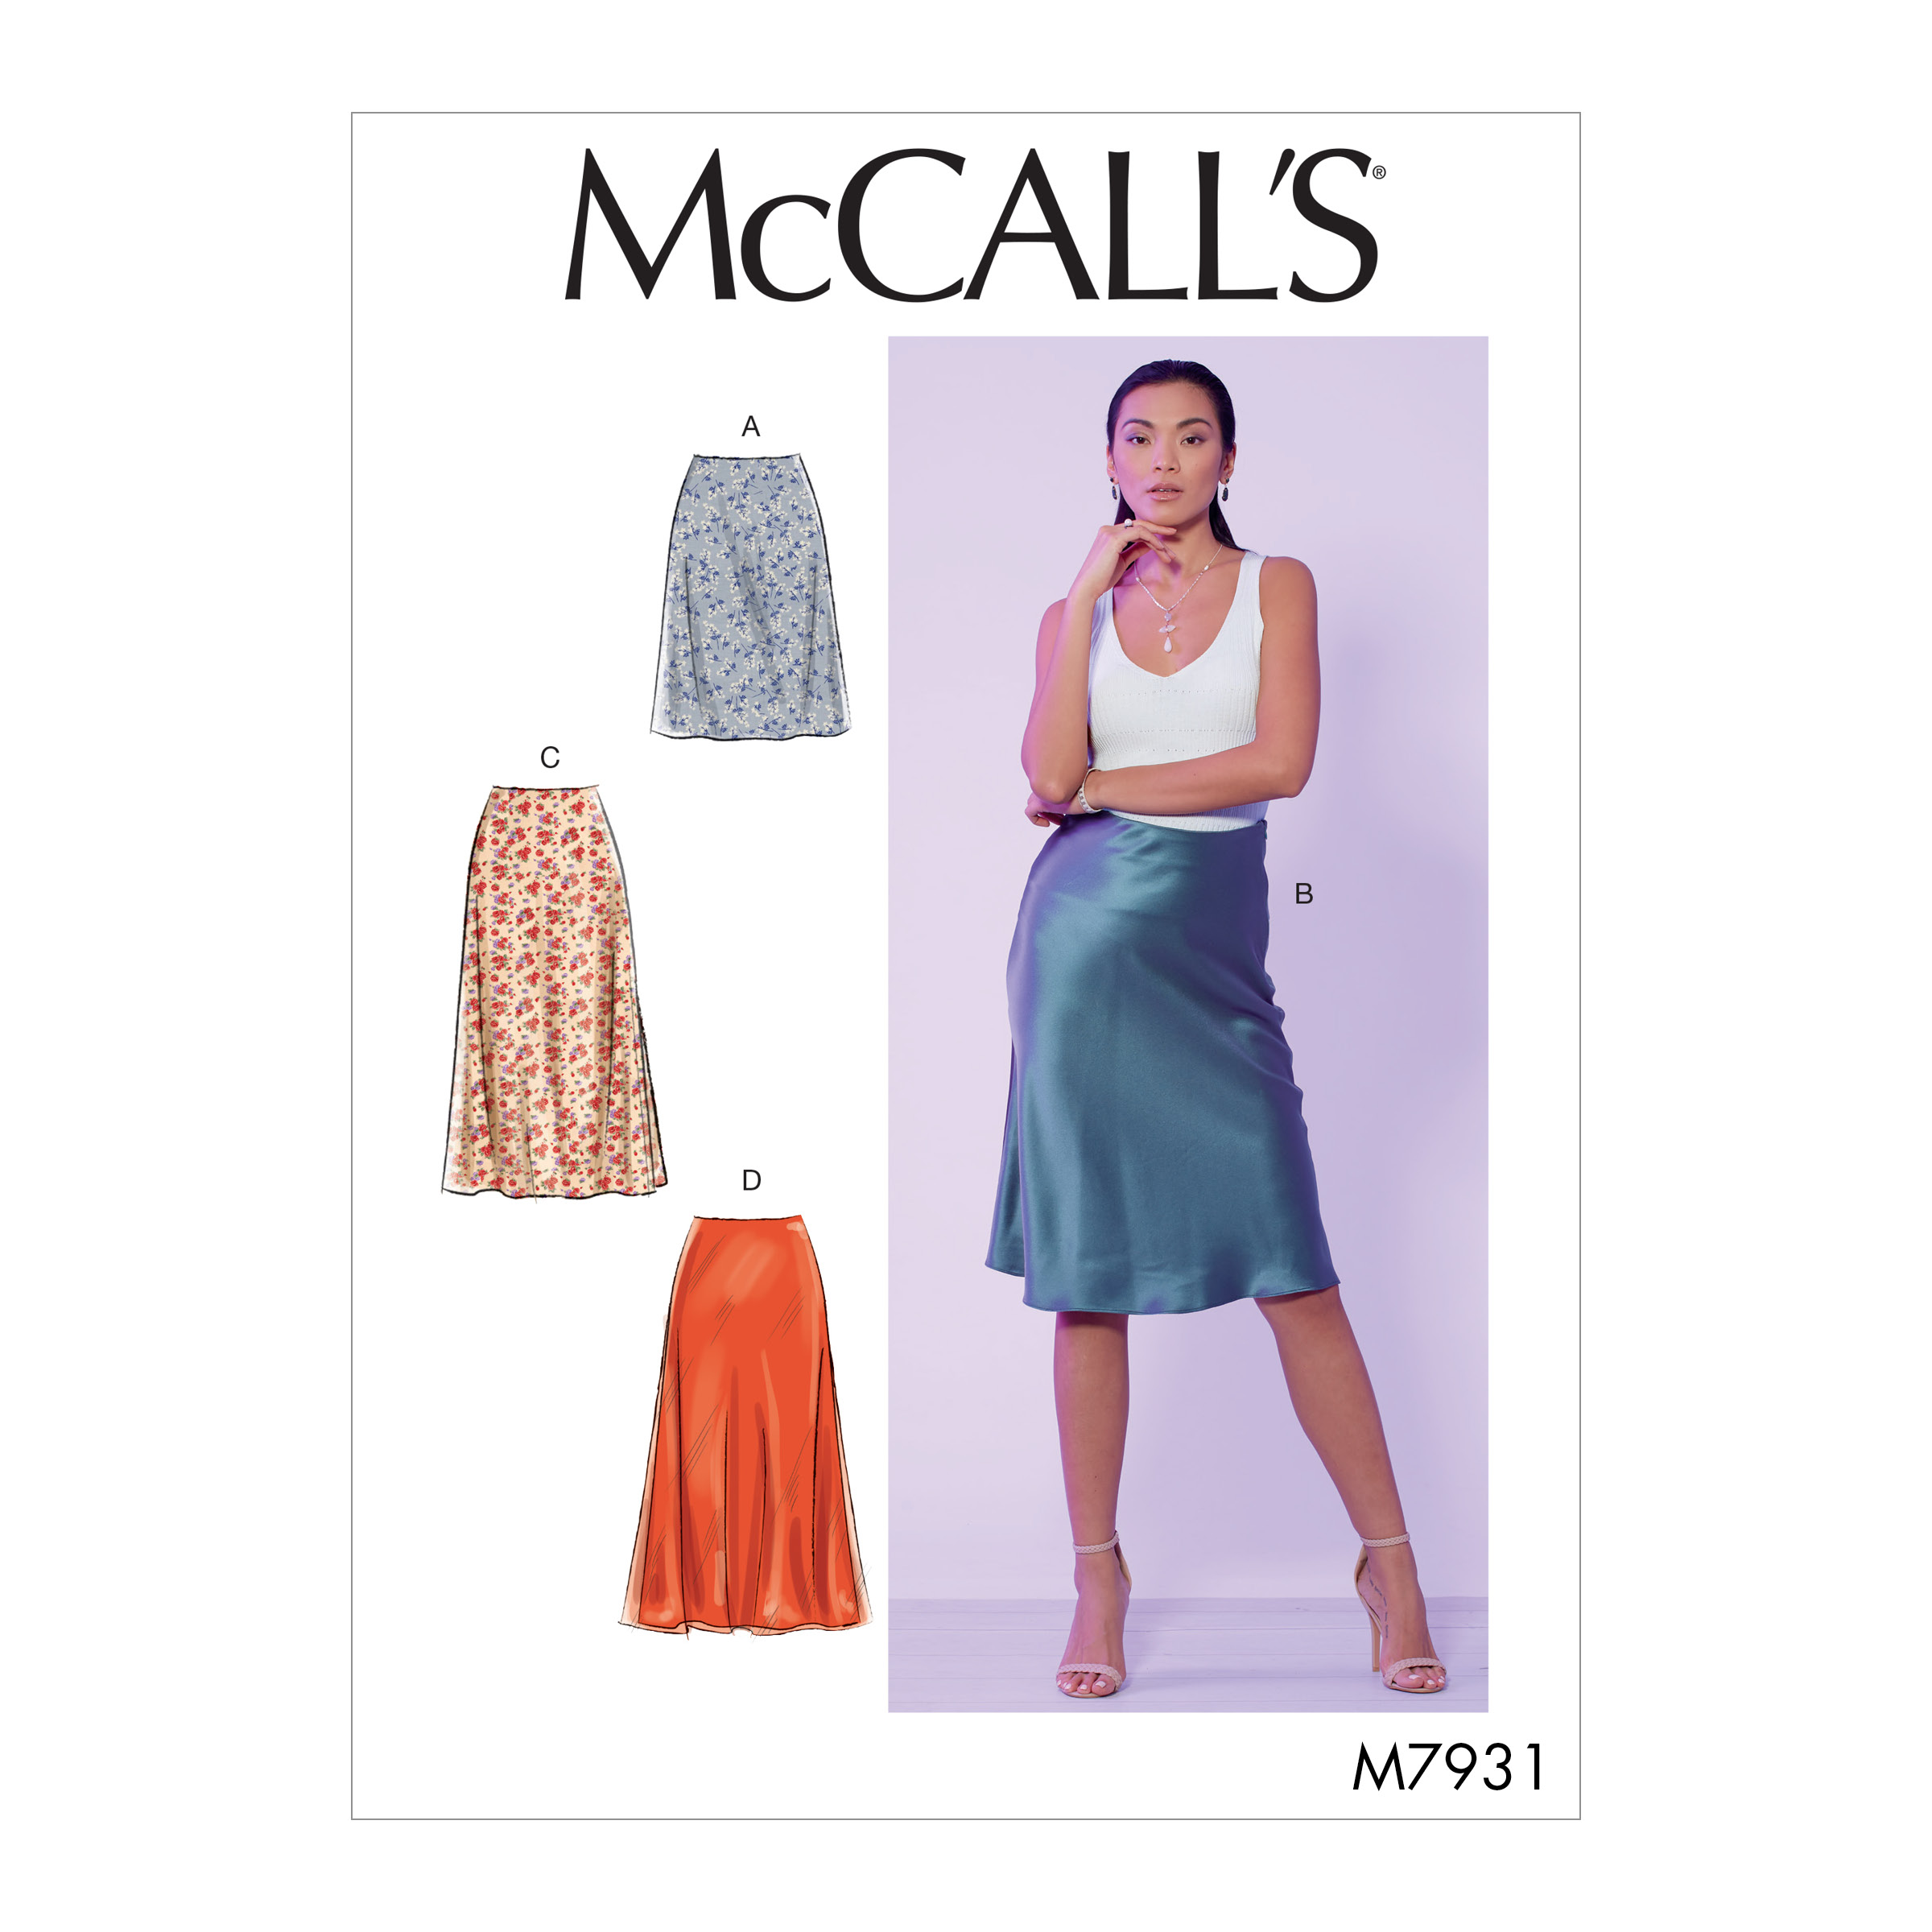 McCall's 7931 Misses' Skirts